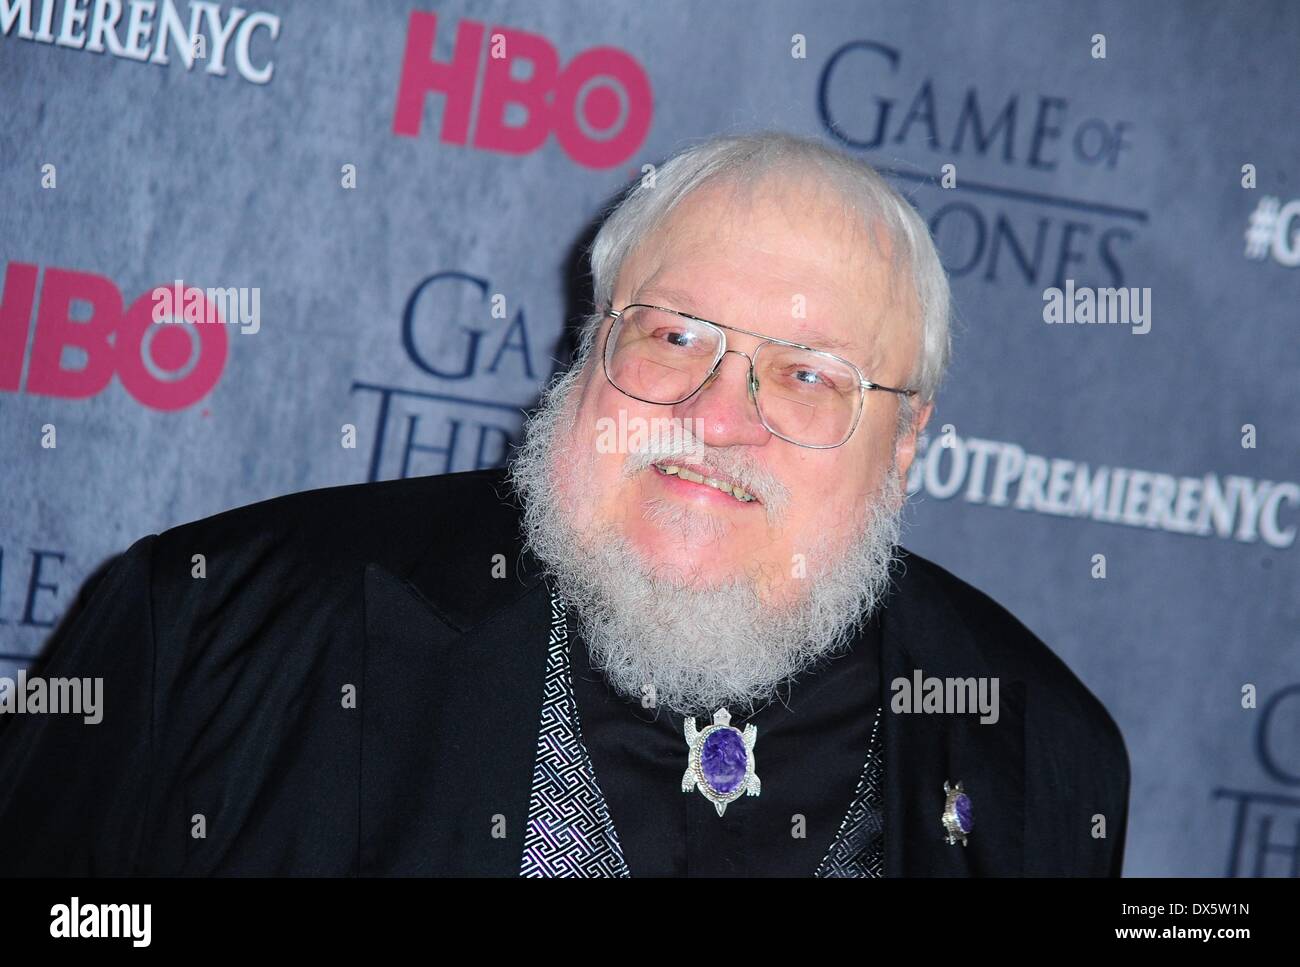 New York, NY, USA. 18th Mar, 2014. George R.R. Martin at arrivals for HBO's GAME OF THRONES Fourth Season Premiere, Avery Fisher Hall at Lincoln Center, New York, NY March 18, 2014. Credit:  Gregorio T. Binuya/Everett Collection/Alamy Live News Stock Photo